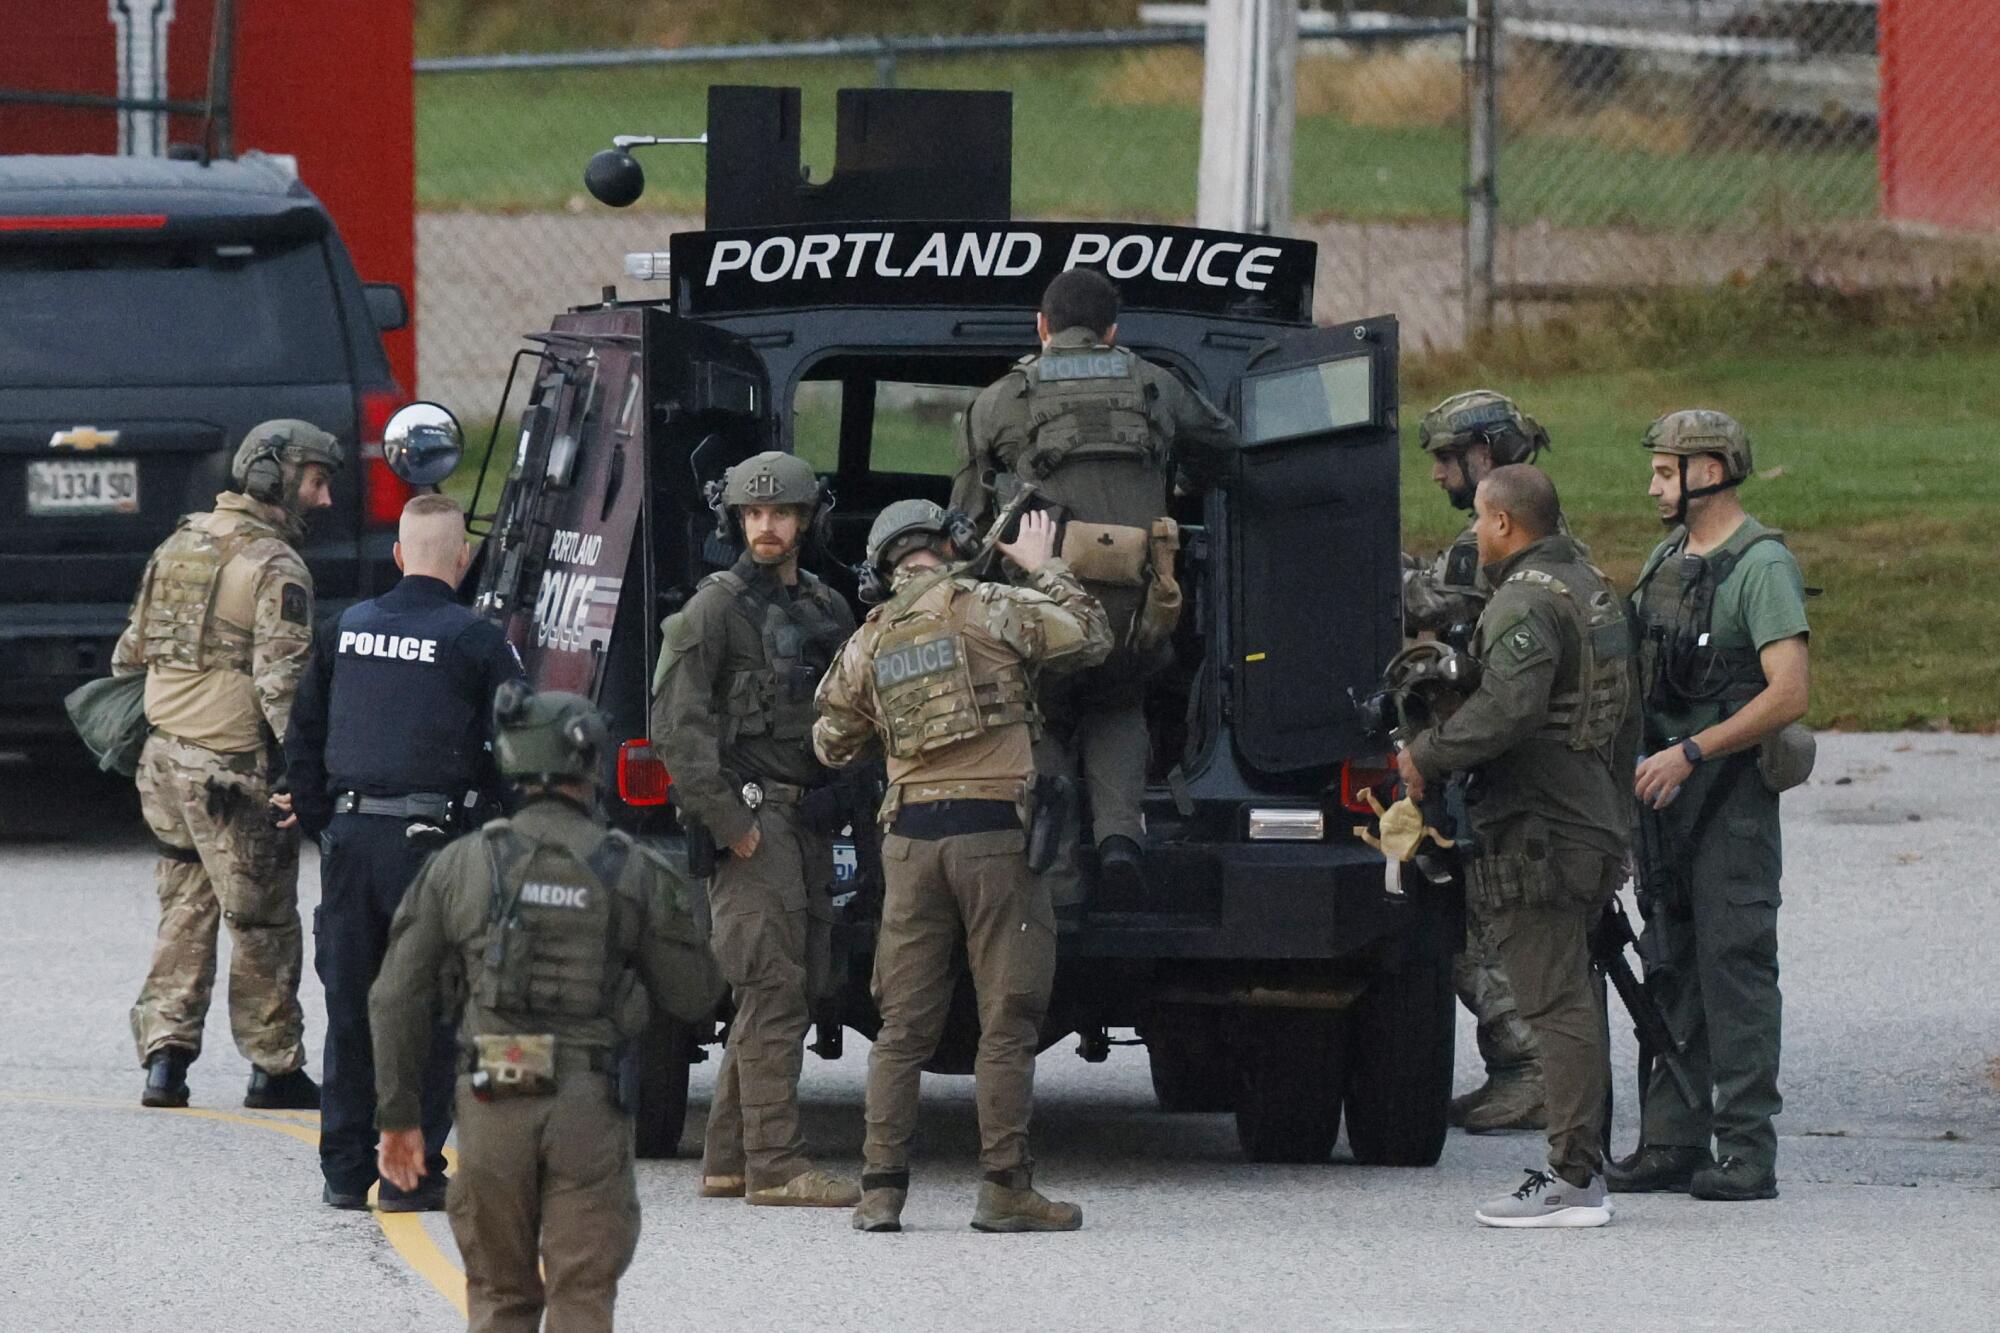 Several law enforcement officers in tactical gear gathering around the open back end of vehicle labeled "Portland Police."